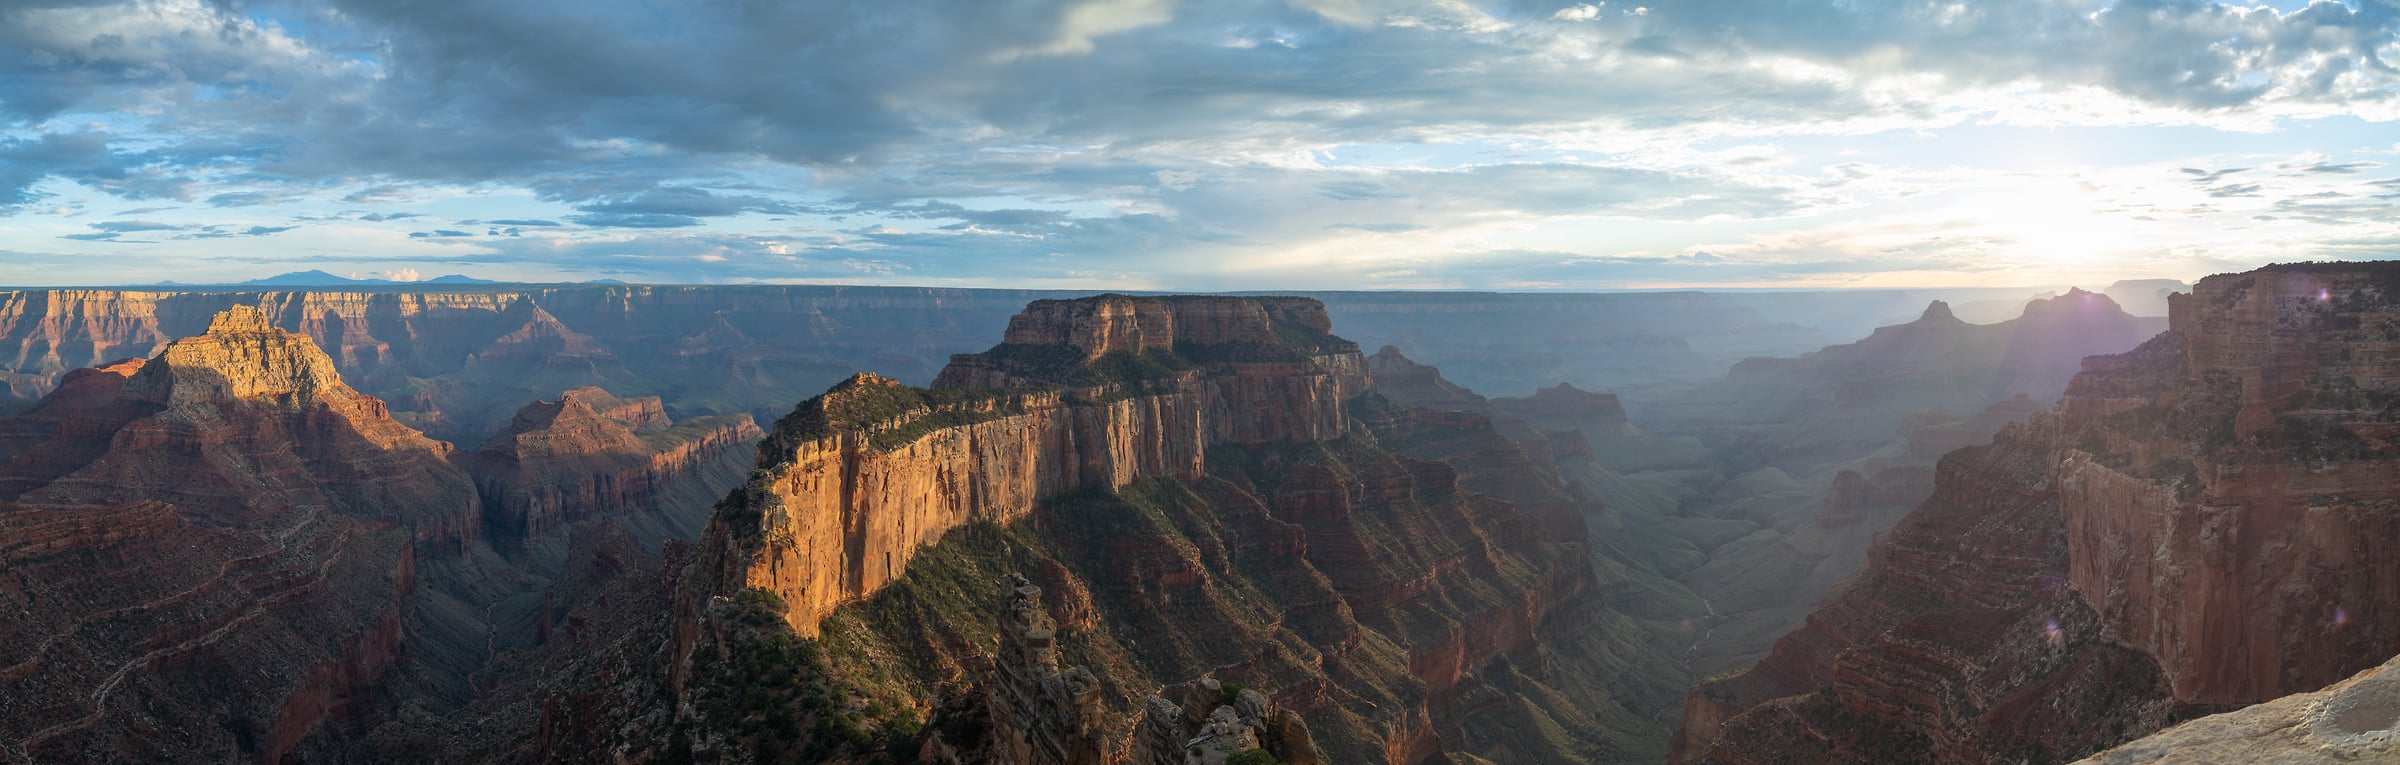 384 megapixels! A very high resolution, large-format VAST photo print of Wotons Throne in the Grand Canyon at sunset; landscape photograph created by Greg Probst in Grand Canyon National Park, Arizona.